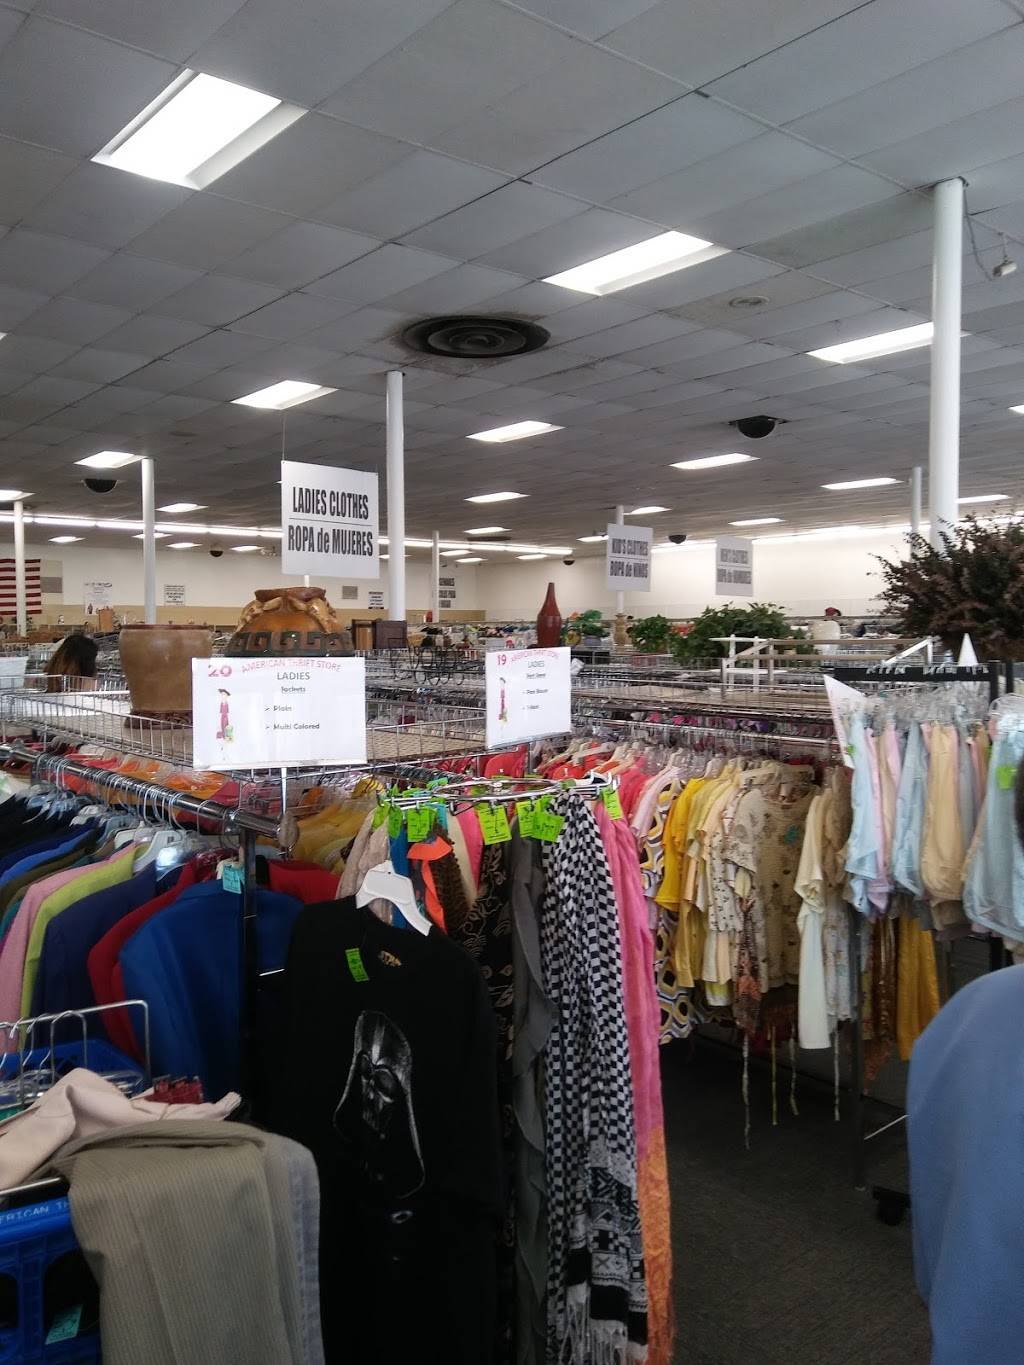 American Thrift Store Hollywood | 330 S State Rd 7, Hollywood, FL 33023, USA | Phone: (954) 962-4983